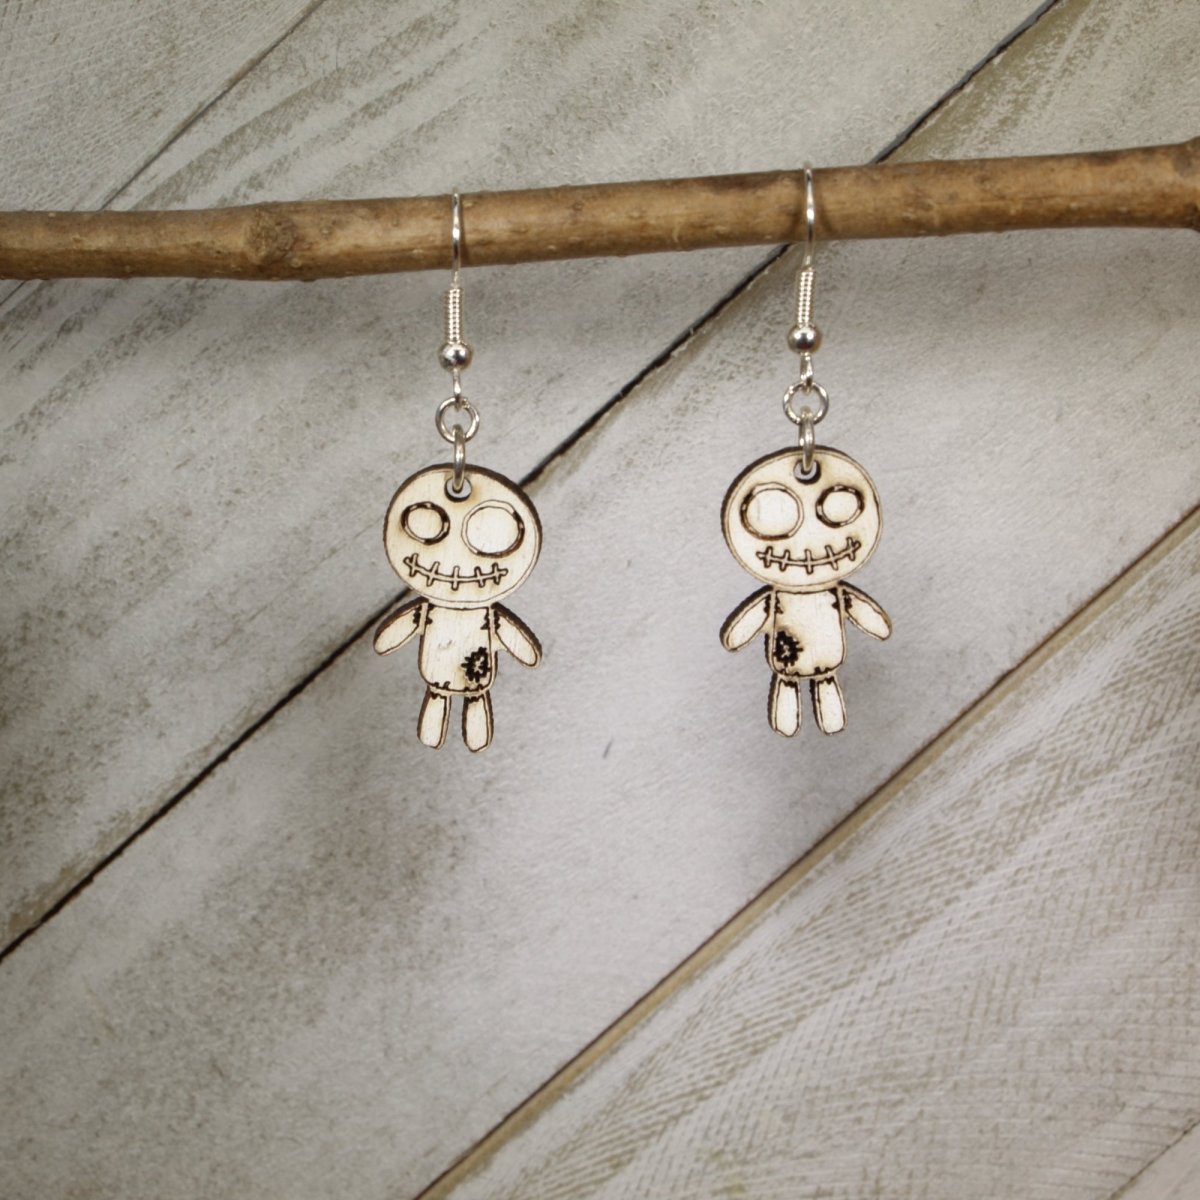 Unique Voodoo Doll Earrings for Mardi Gras Celebration - - Cate's Concepts, LLC